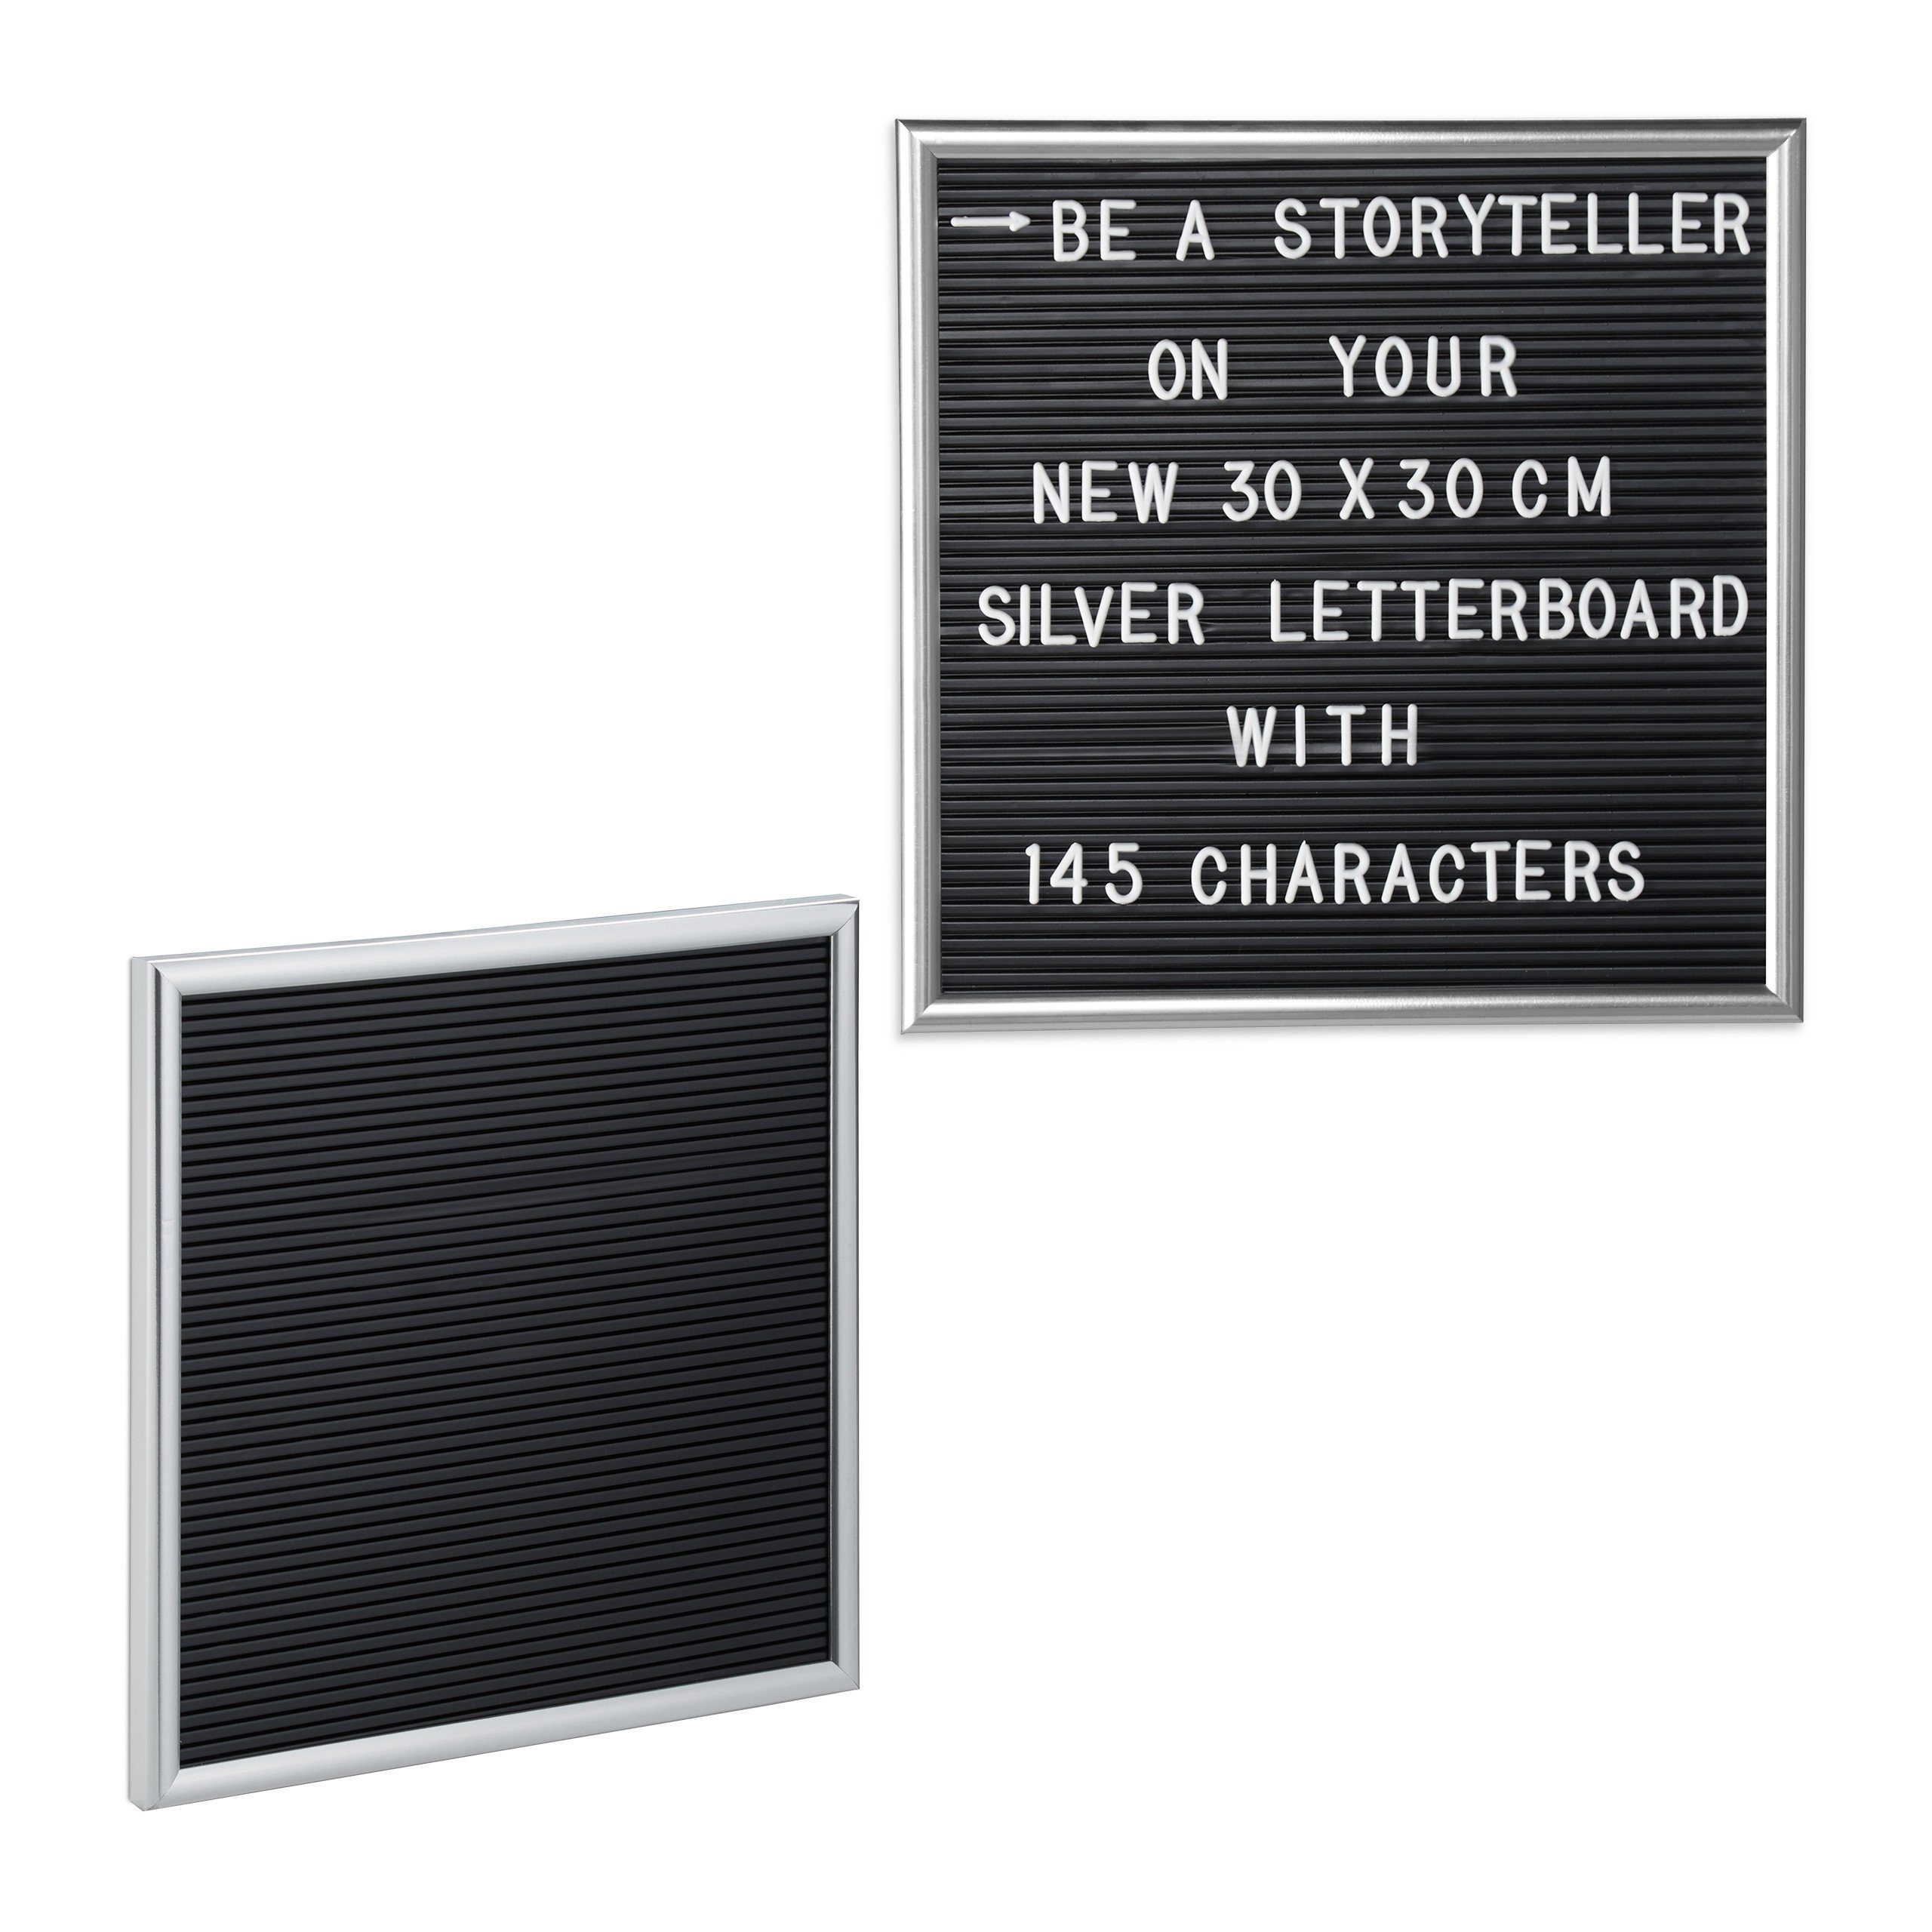 x cm Memoboard silber 2 x 30 Letterboard 30 relaxdays